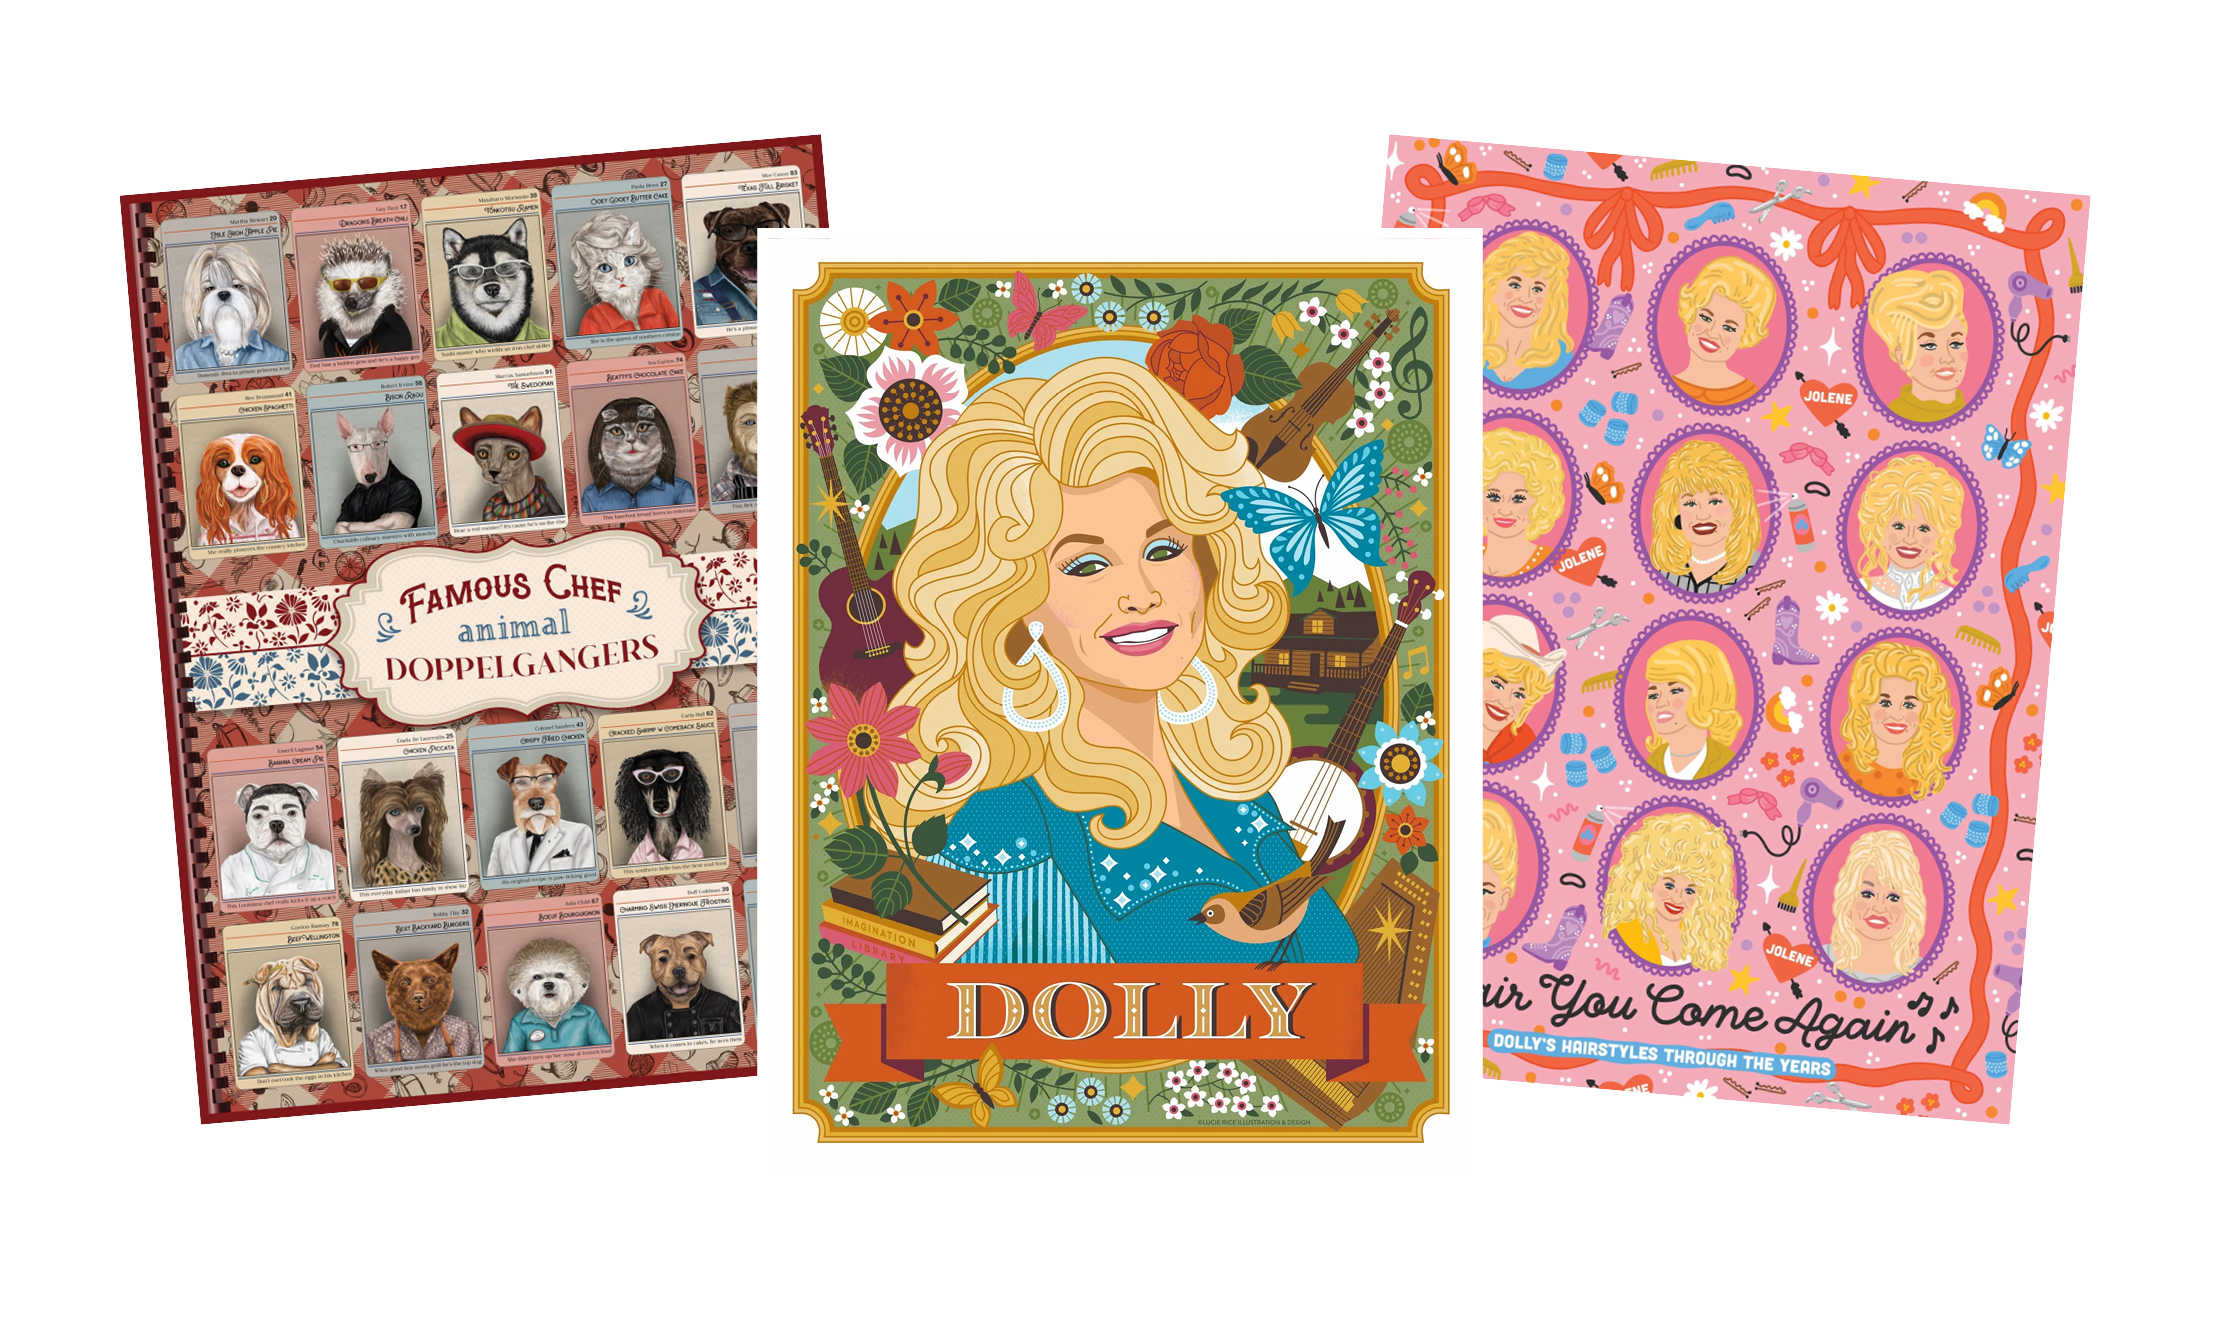 Our three featured puzzles: Dolly Parton illustrated portrait puzzle, Celebrity Chef Animal Doppelgangers puzzle, and "Hair You Come Again" Dolly's Hairstyles Through The Years puzzle.